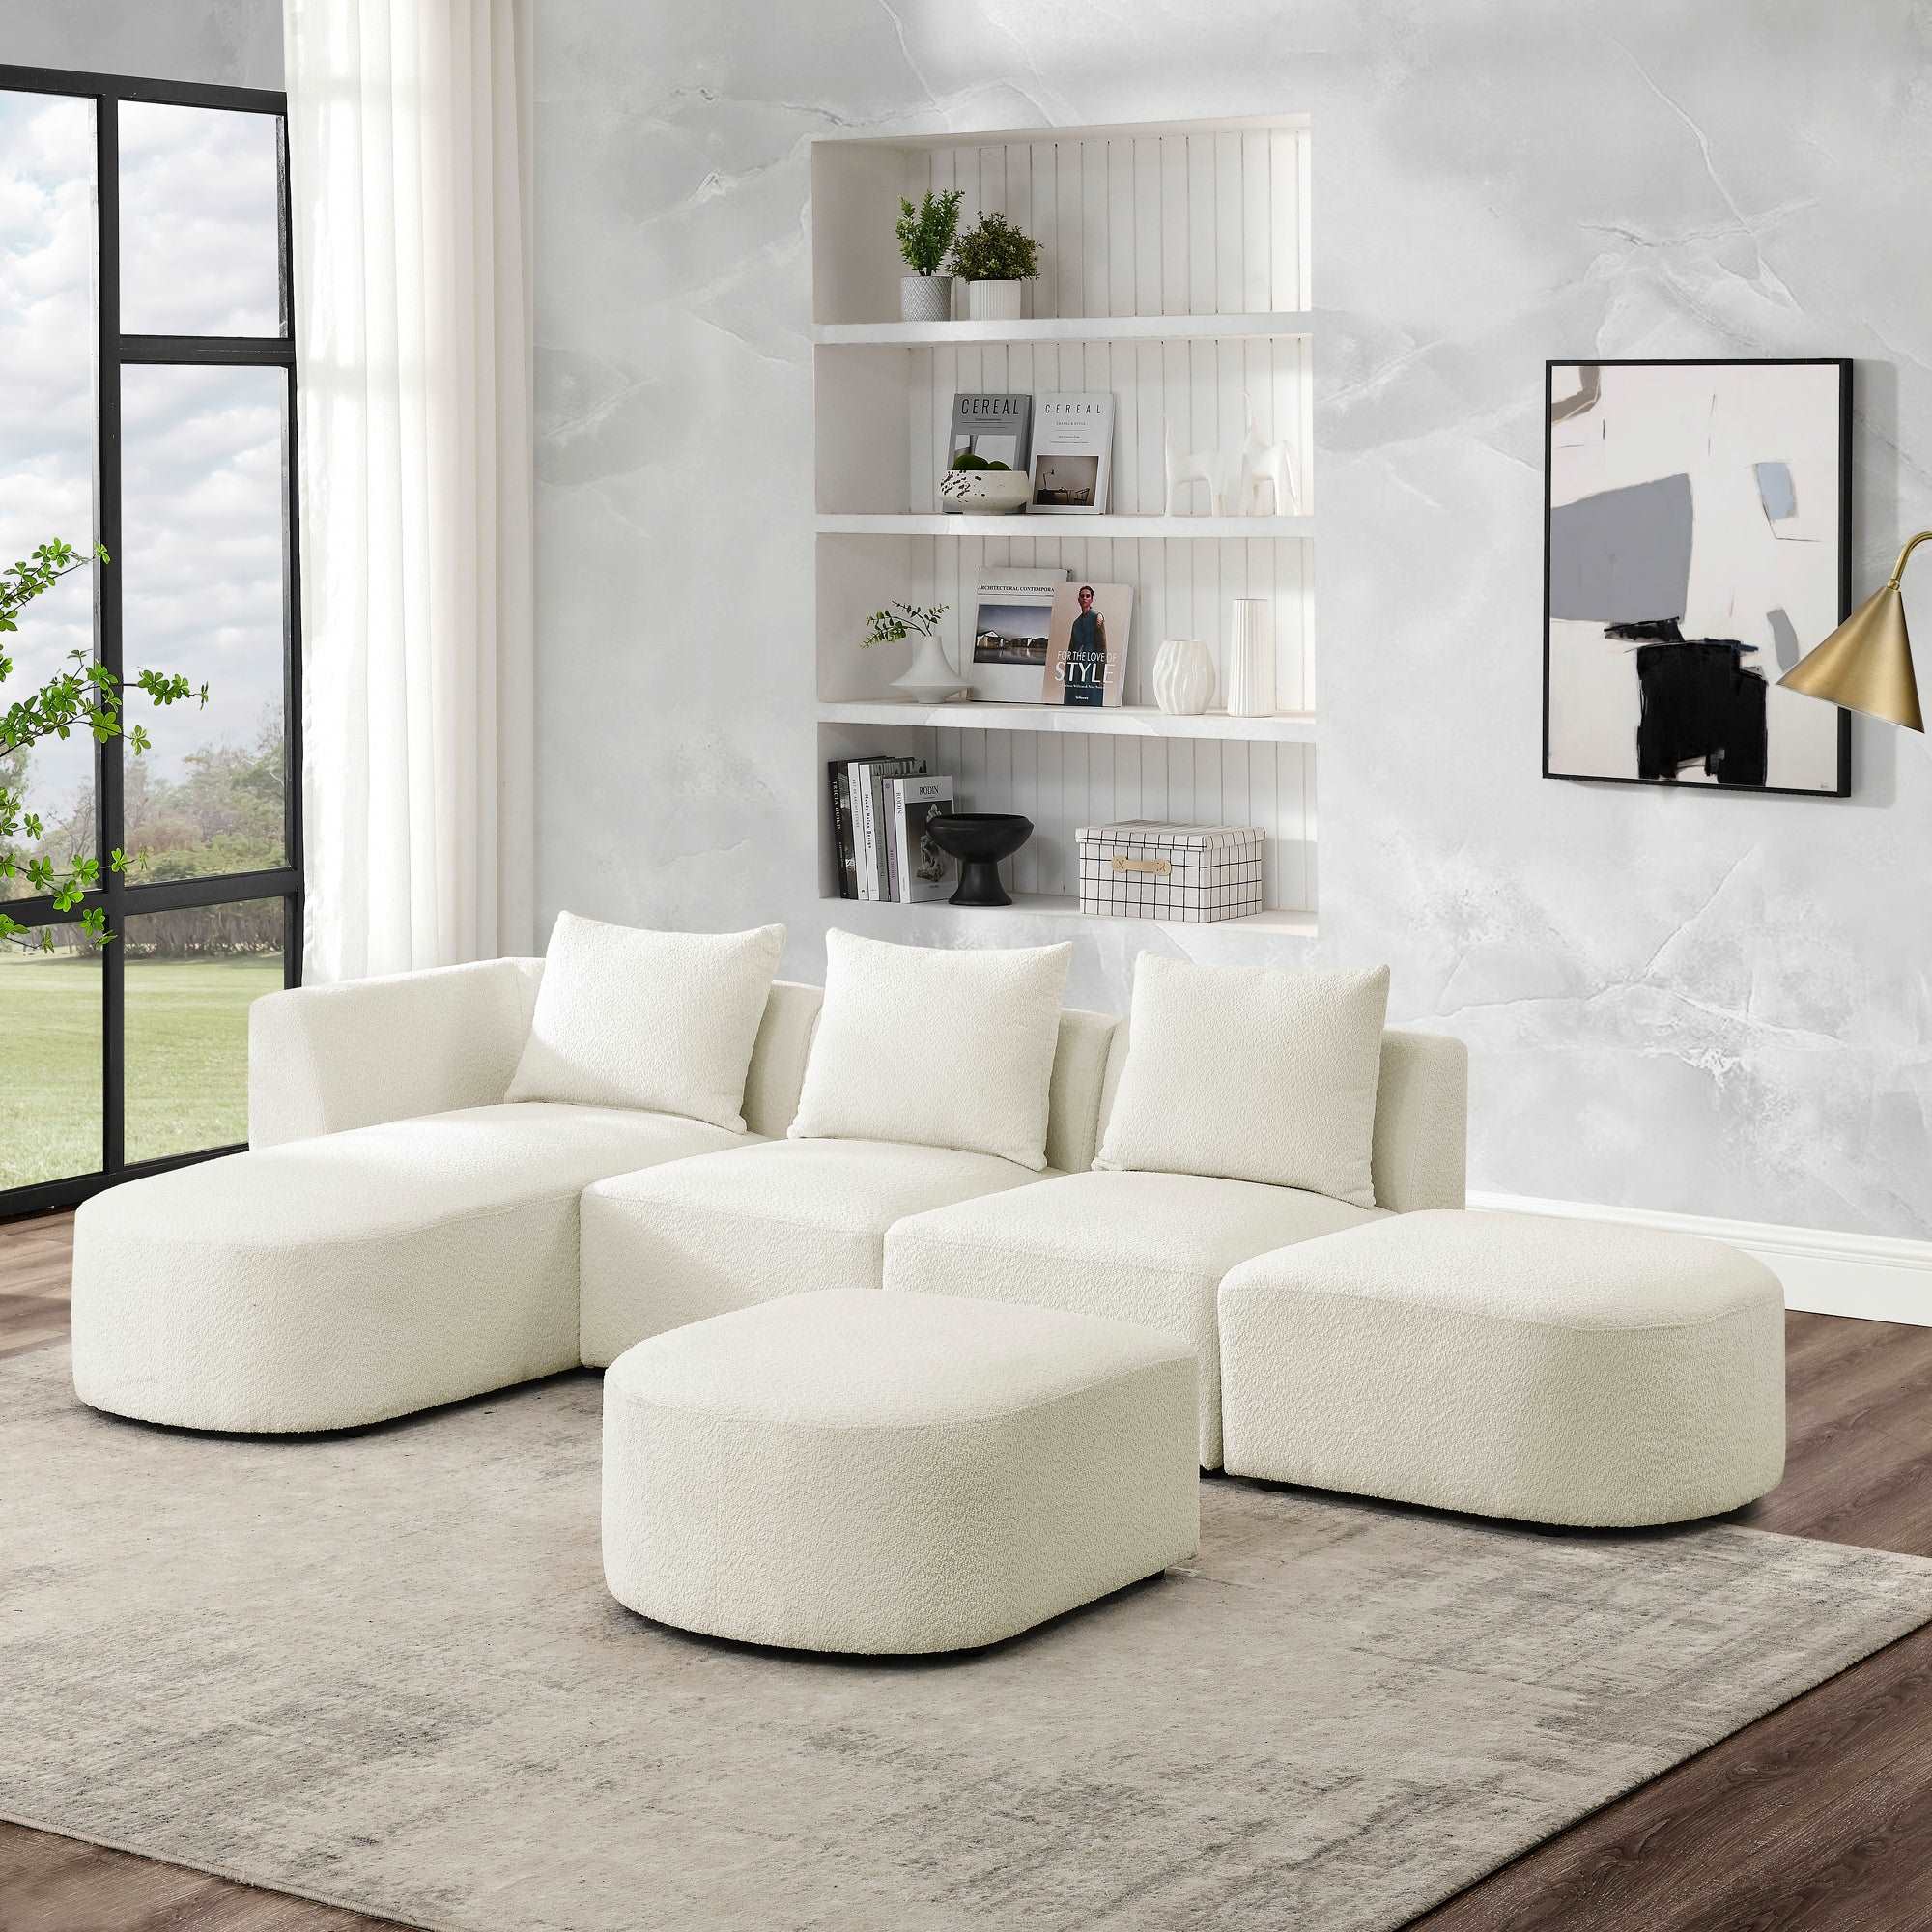 Bellemave 113" L-Shape Sectional Sofa with Left Side Chaise and Ottoman, Modular Sofa, DIY Combination